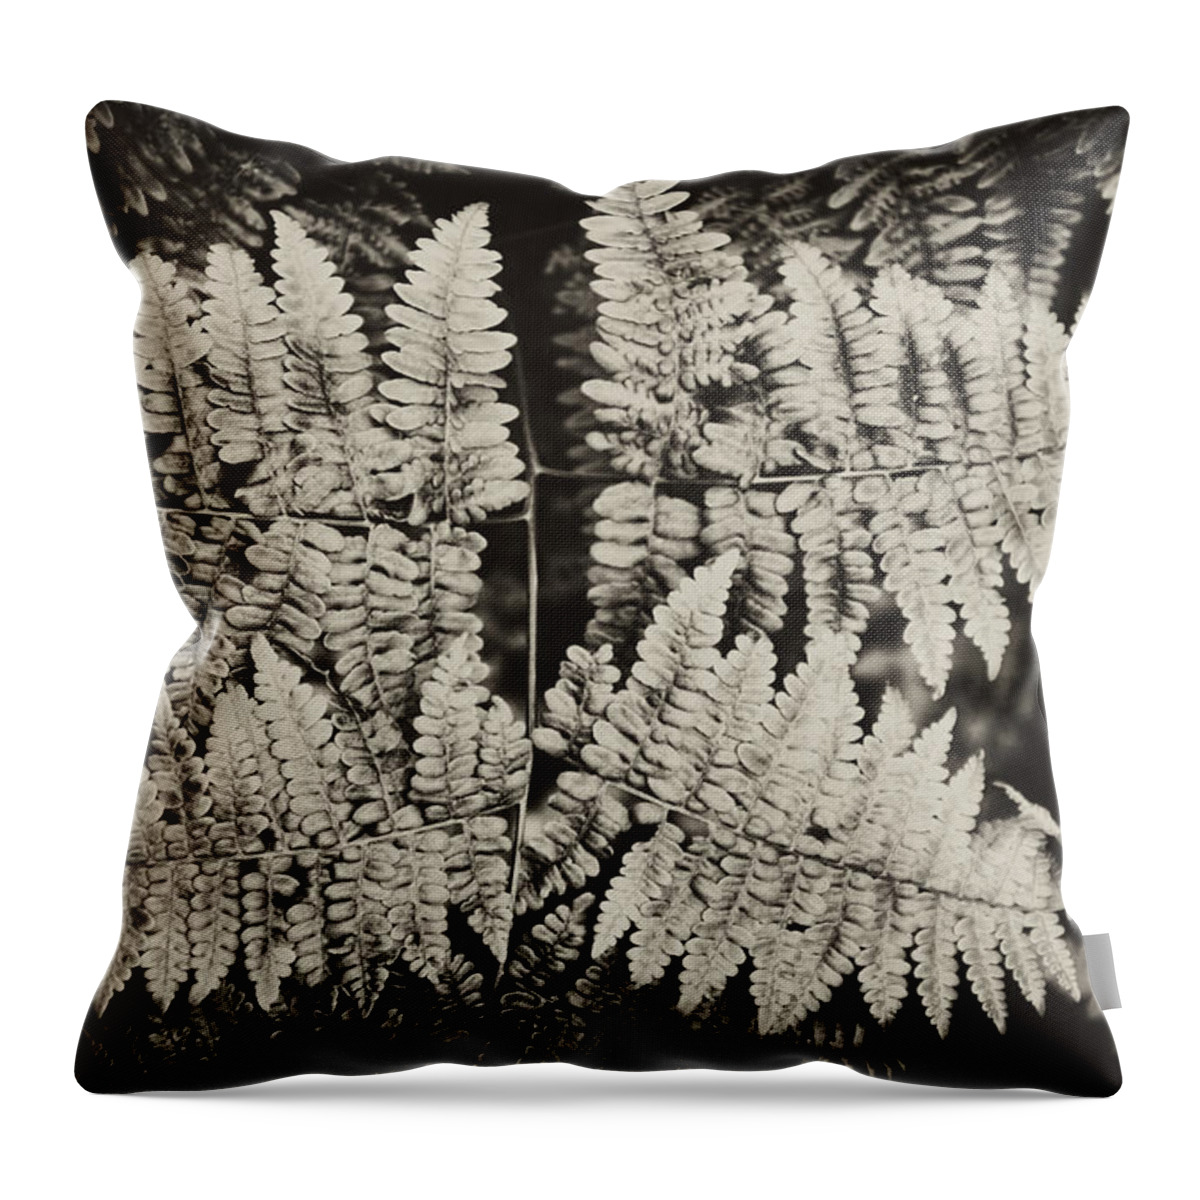 Fern Throw Pillow featuring the photograph Ferns by Hugh Smith